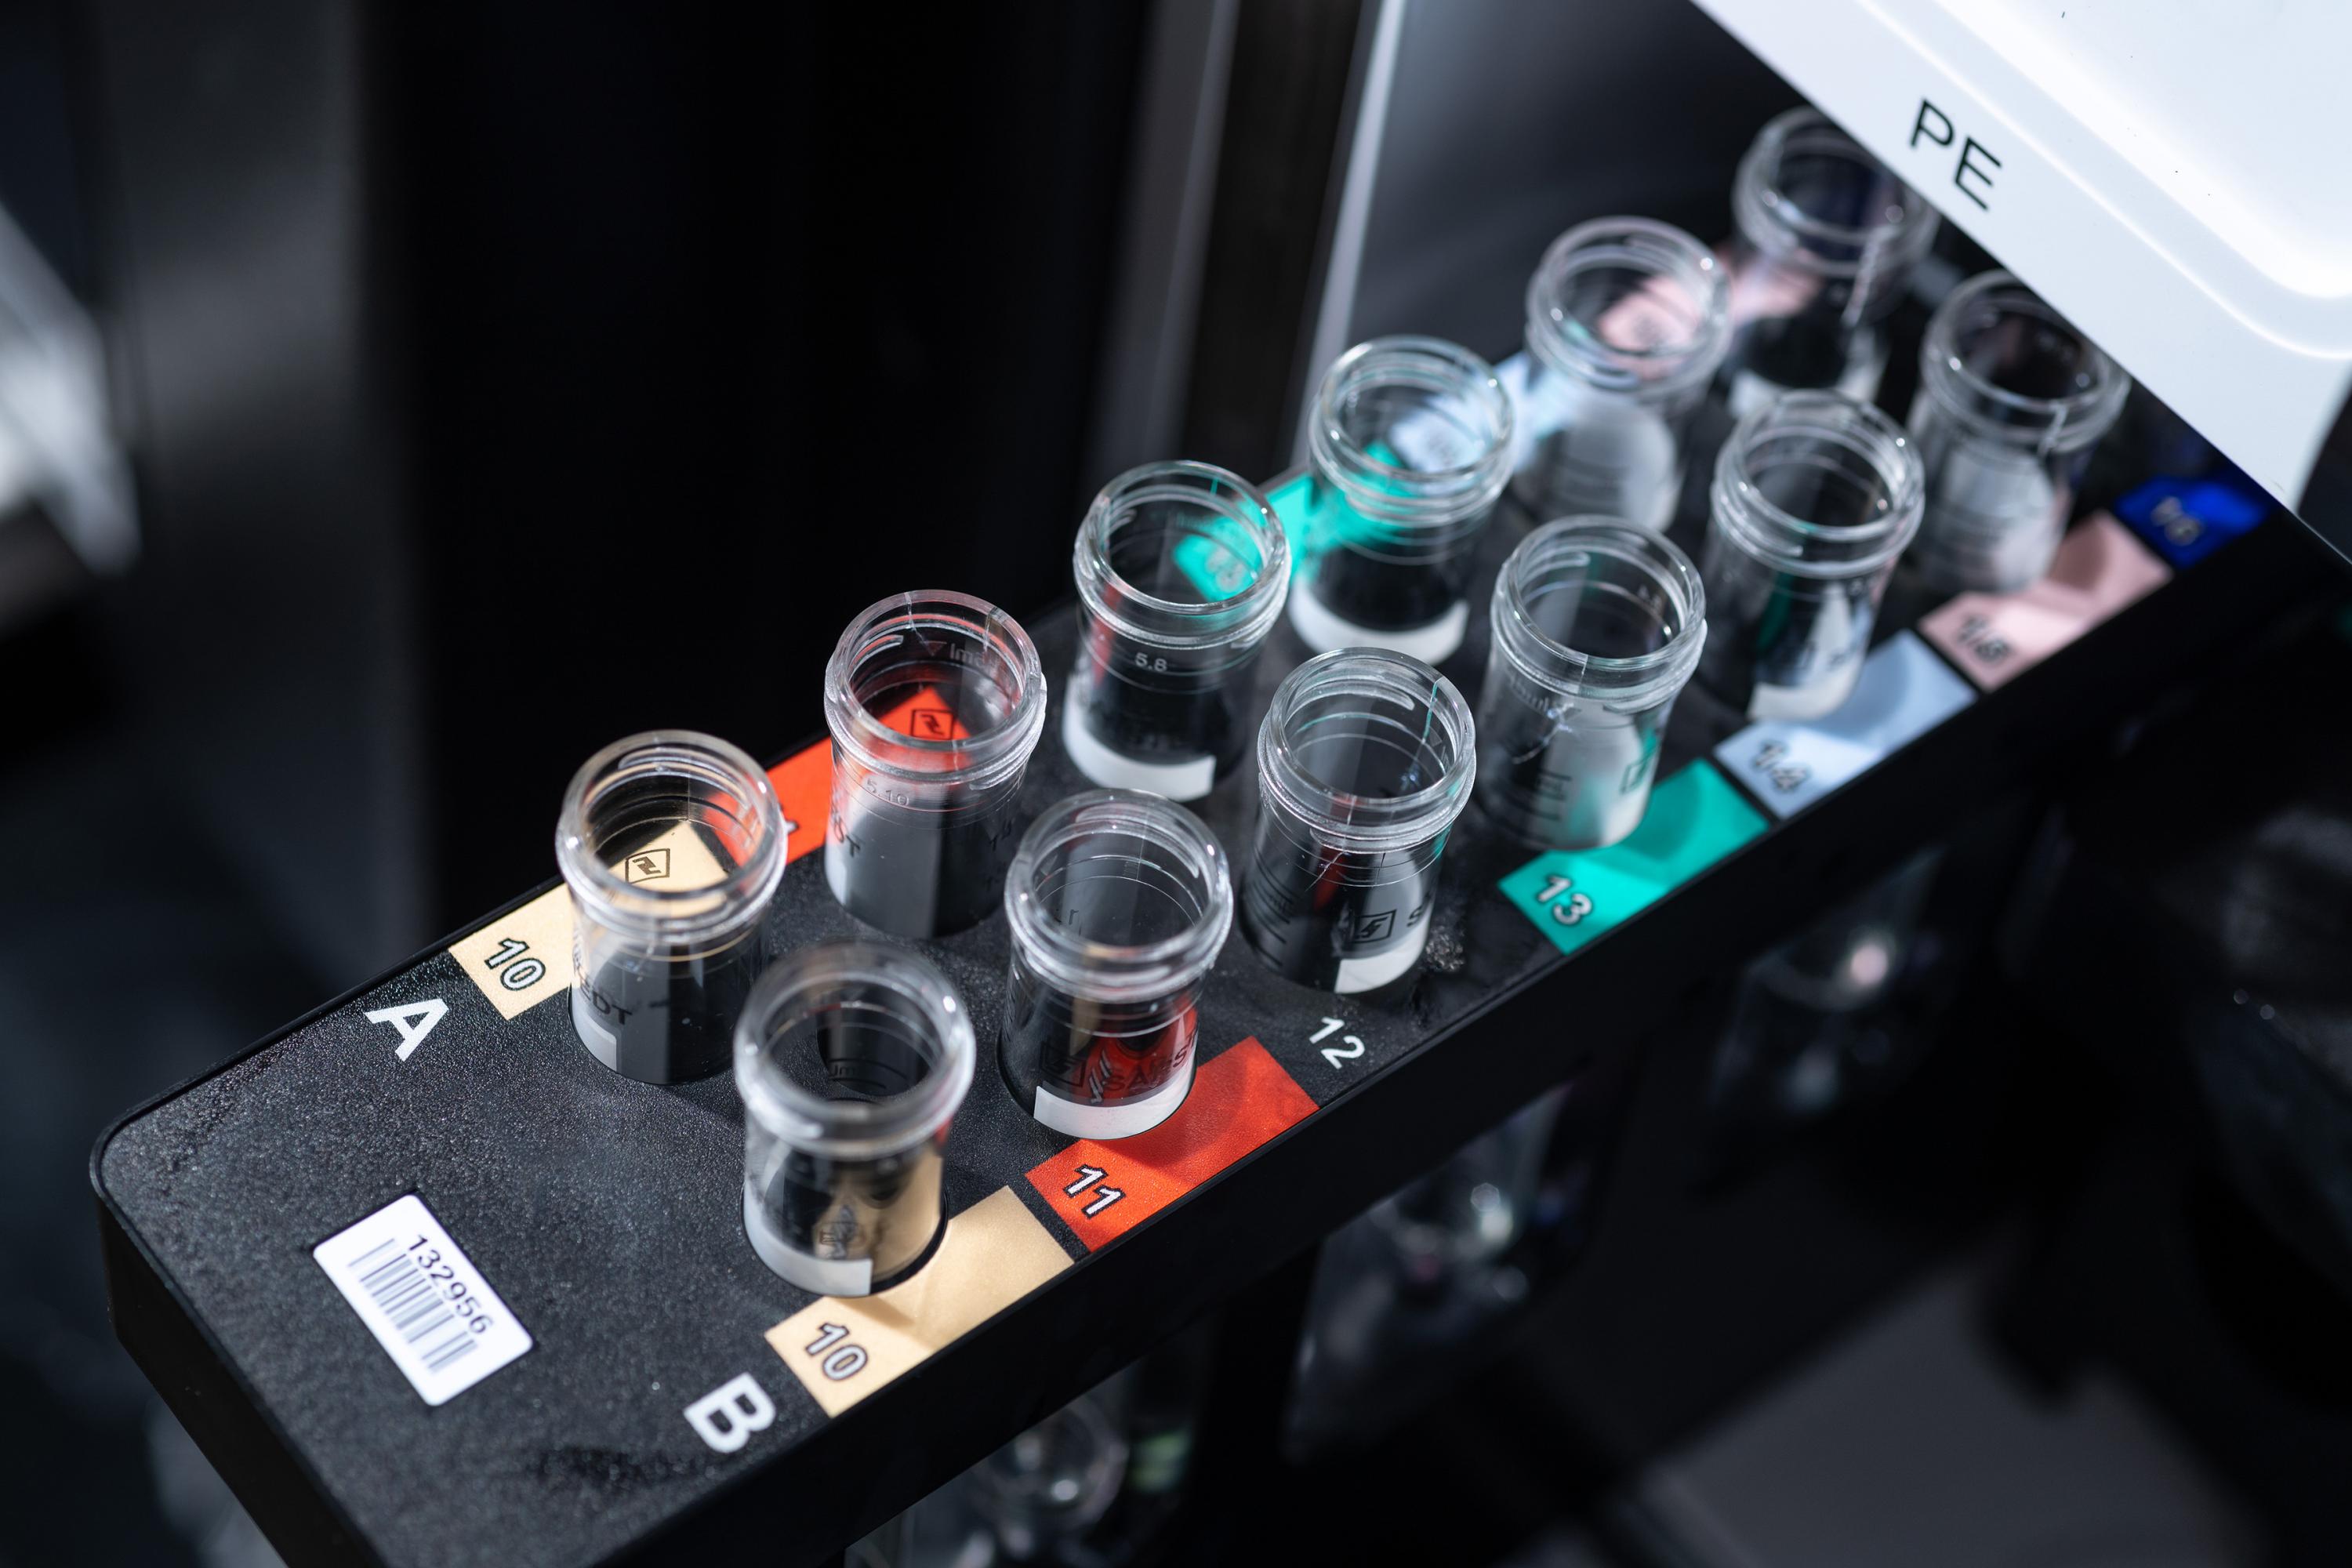 Sample tubes from sequencing equipment are shown in Georgia Tech’s Petit Institute for Bioengineering and Bioscience. (Credit: Rob Felt, Georgia Tech)